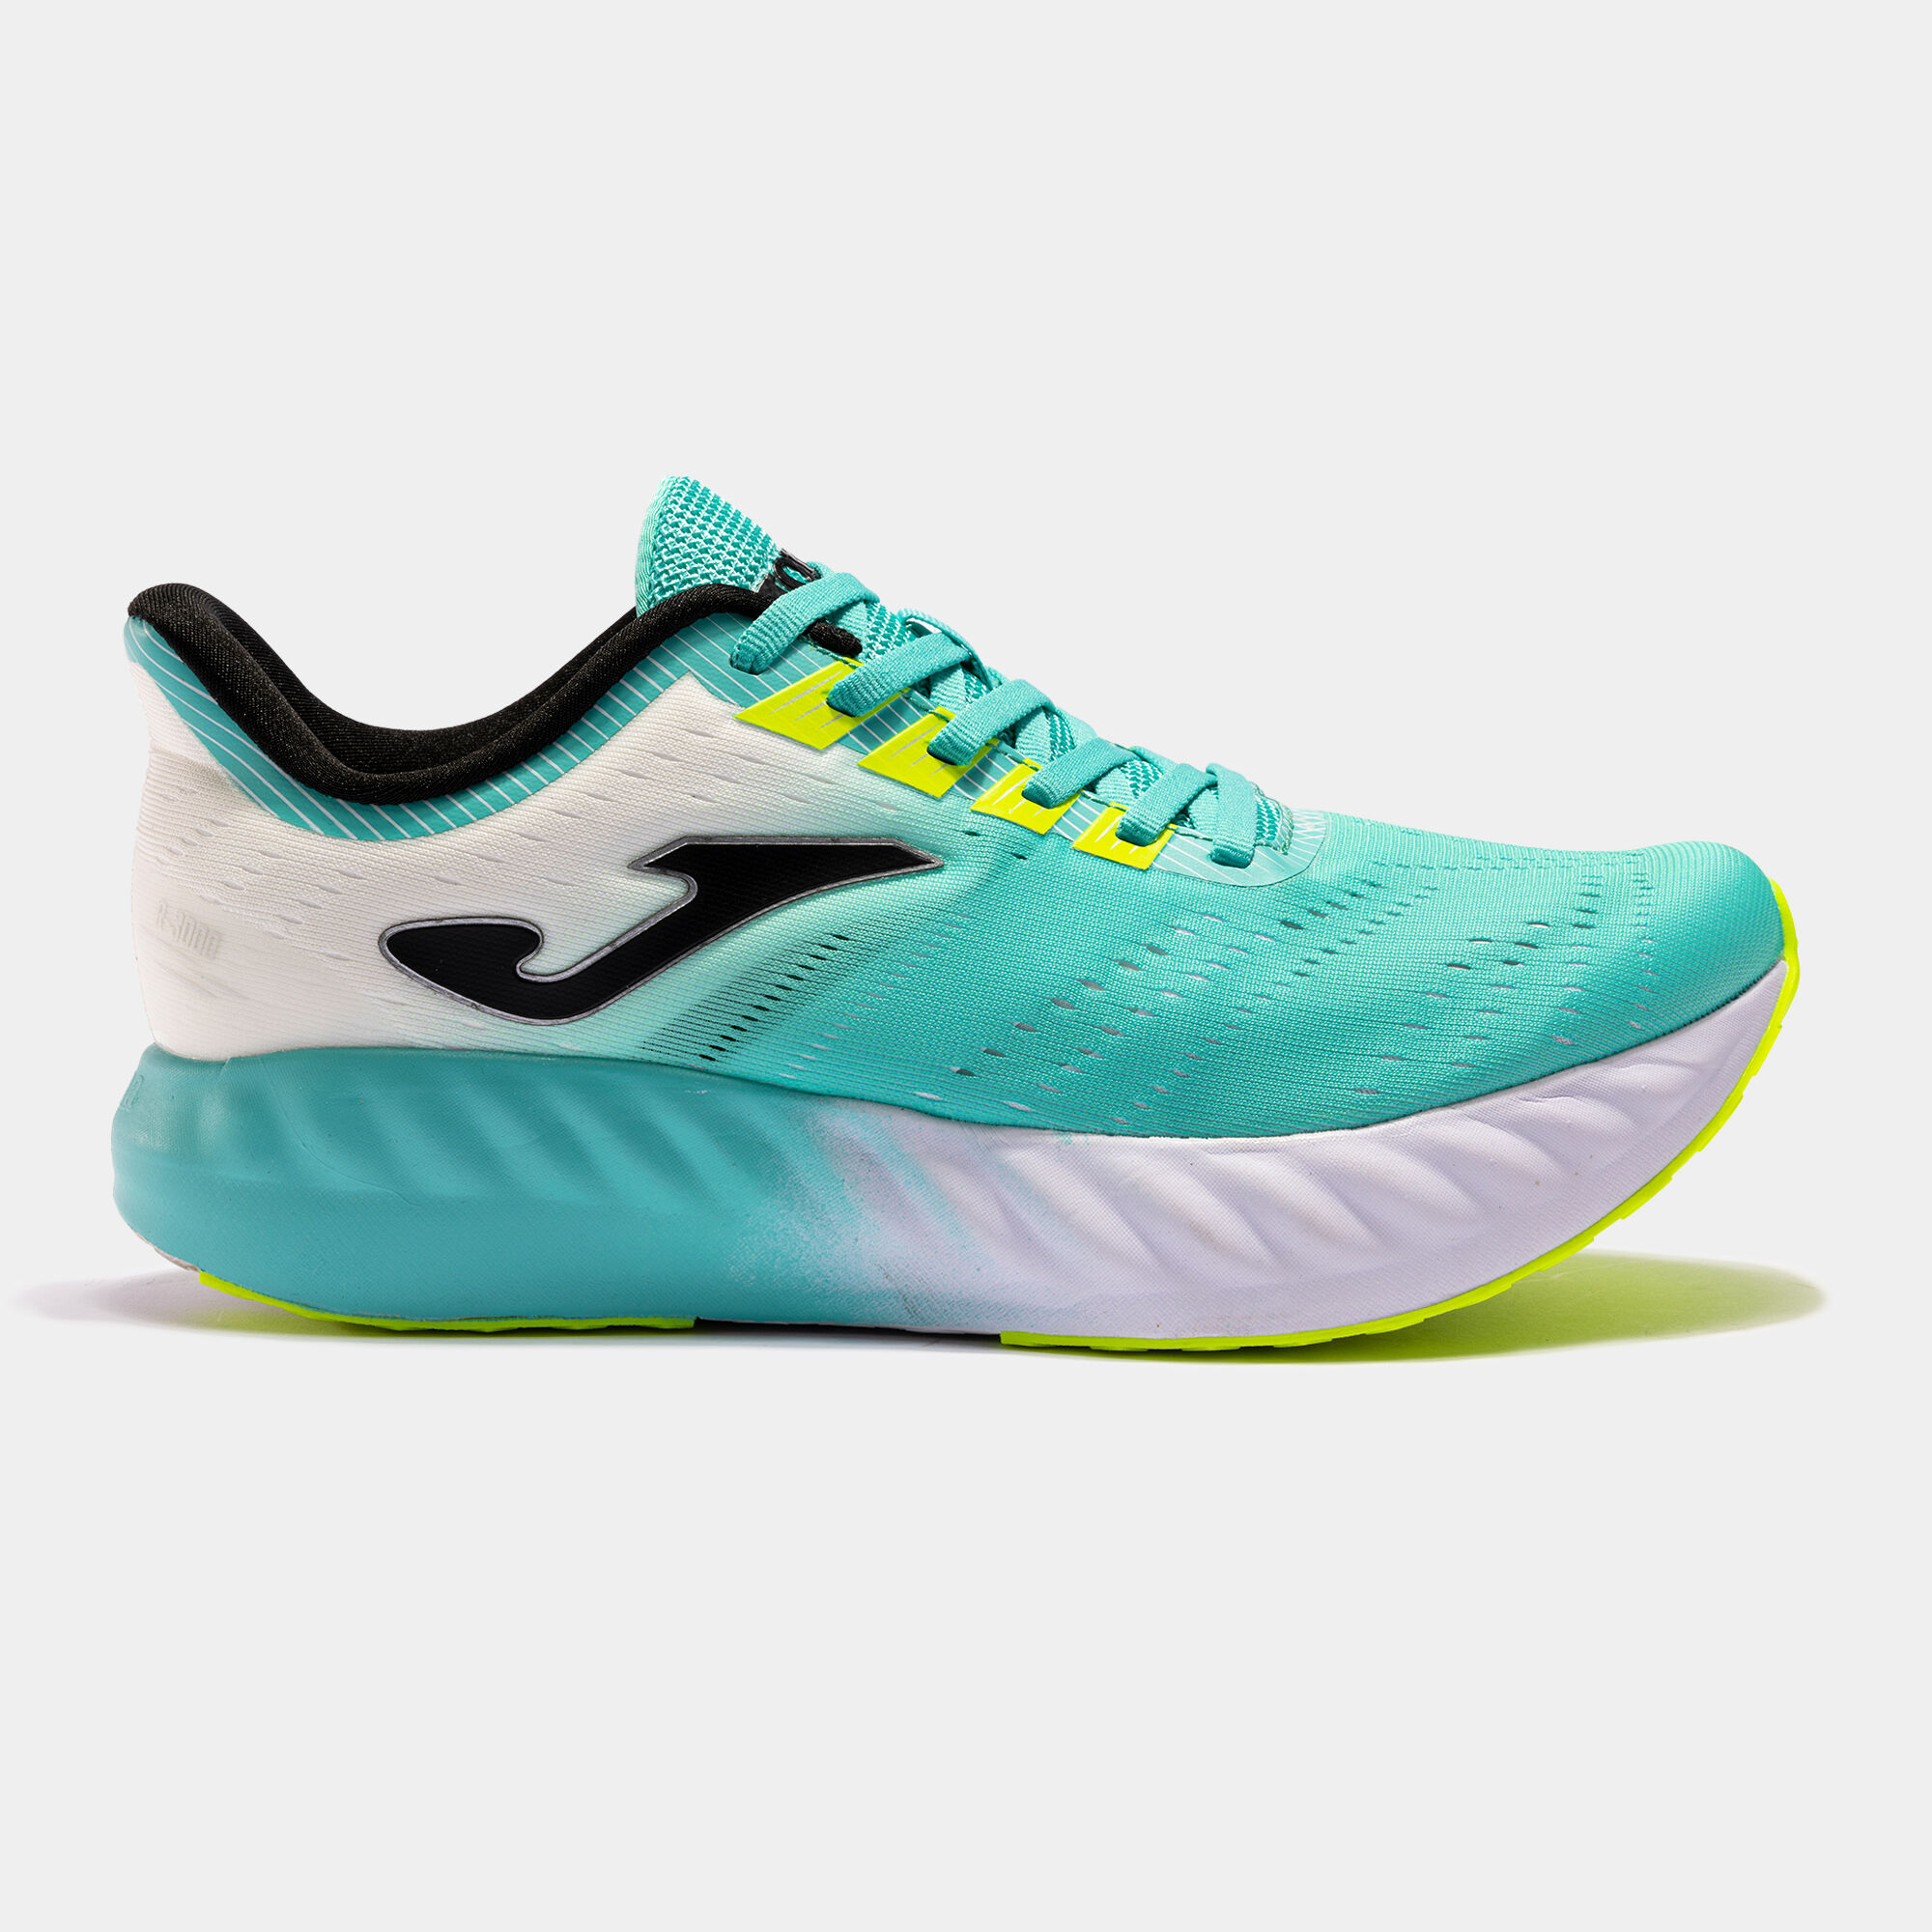 Chaussures running R.3000 23 unisexe turquoise